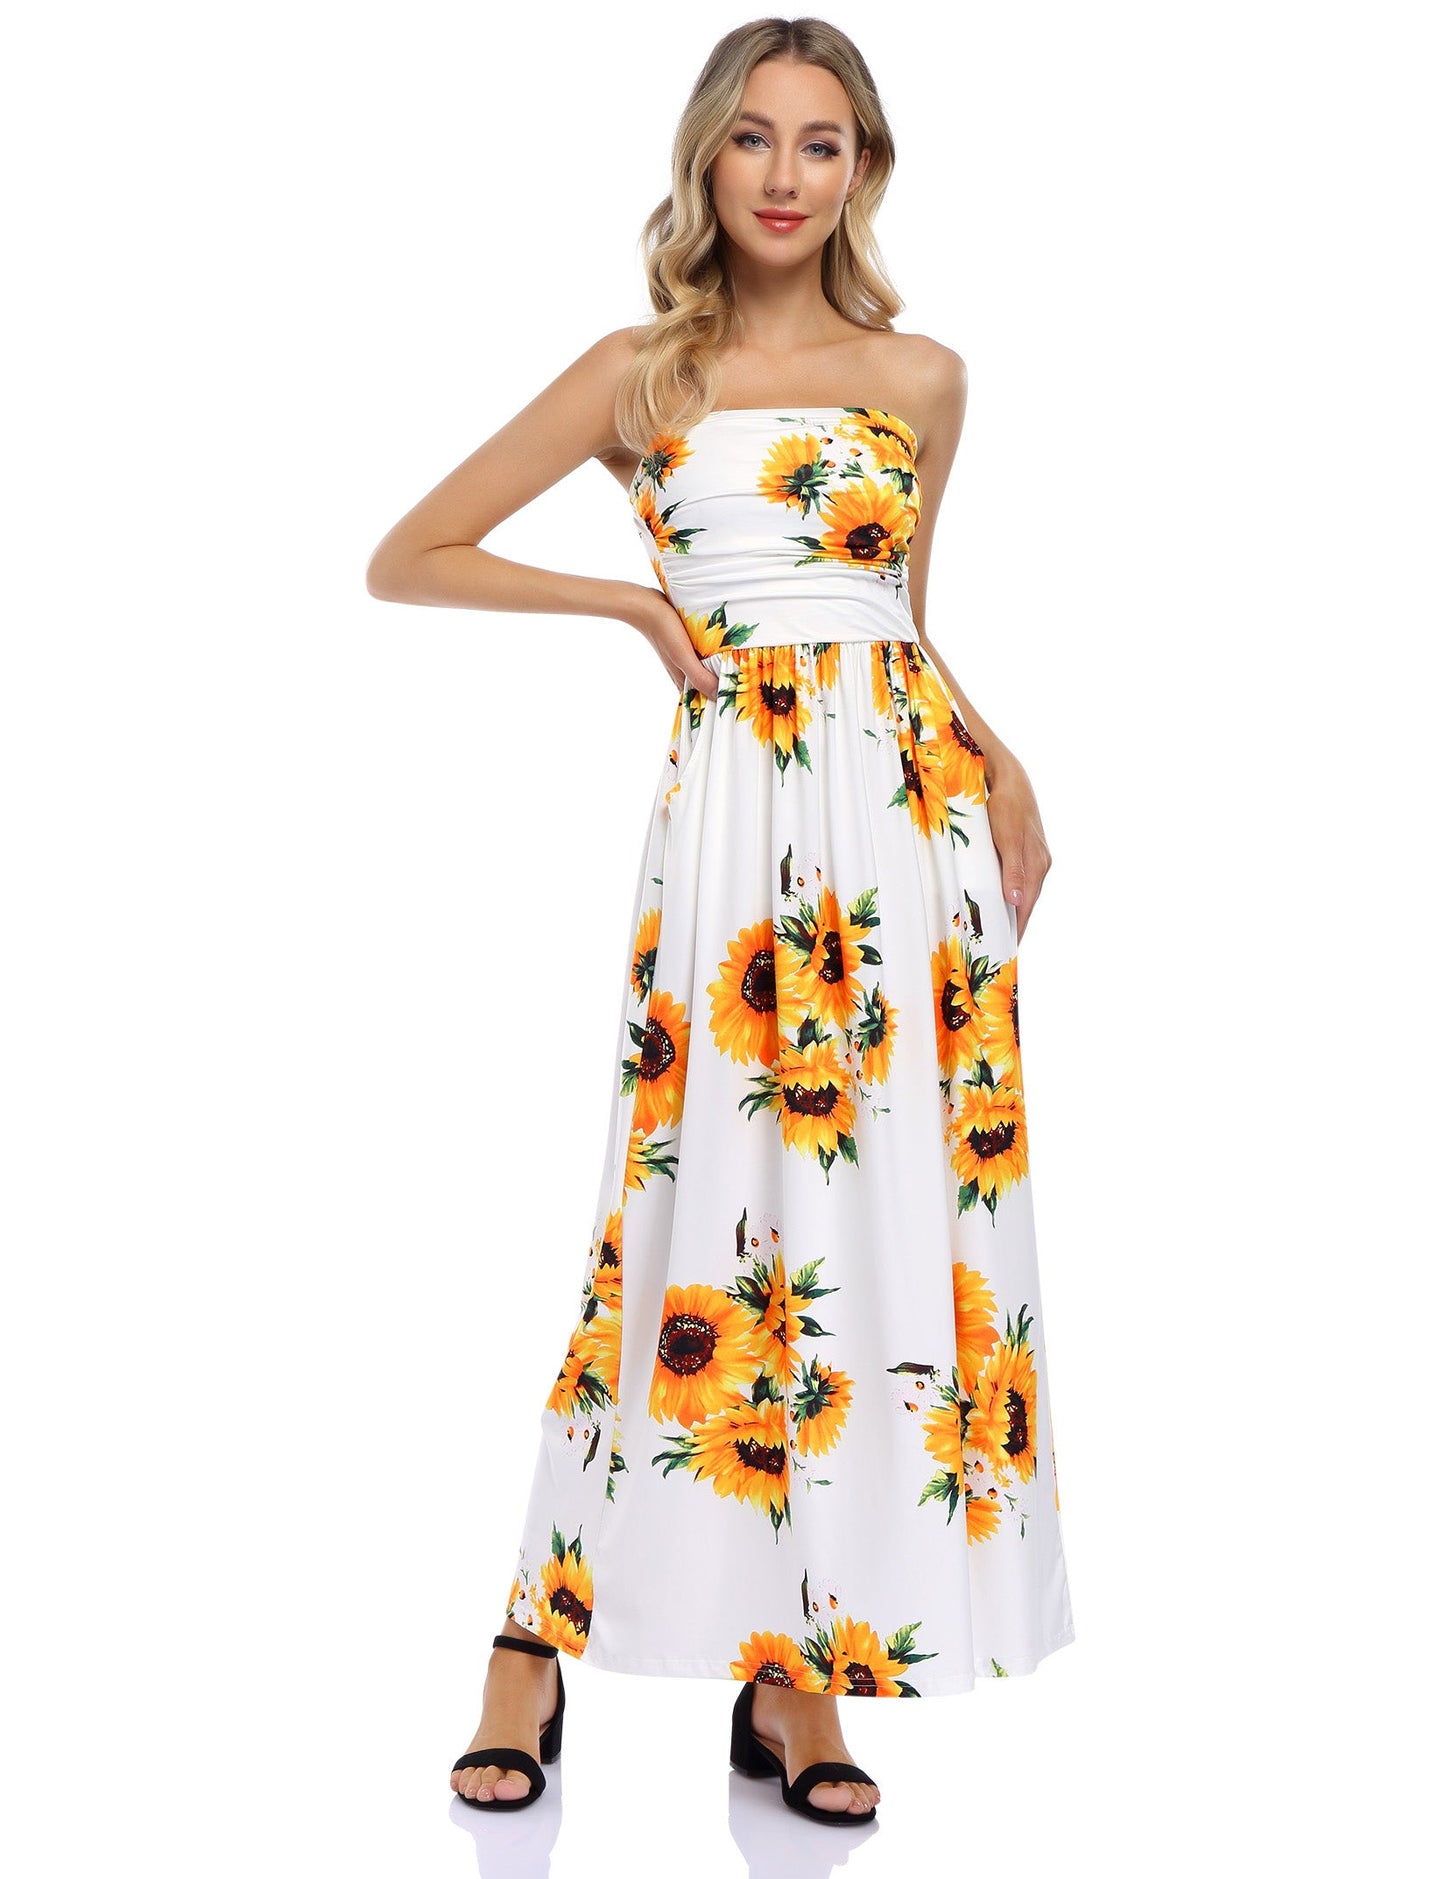 YESFASHION Women's Strapless Graceful Floral Party Maxi Long Dress White